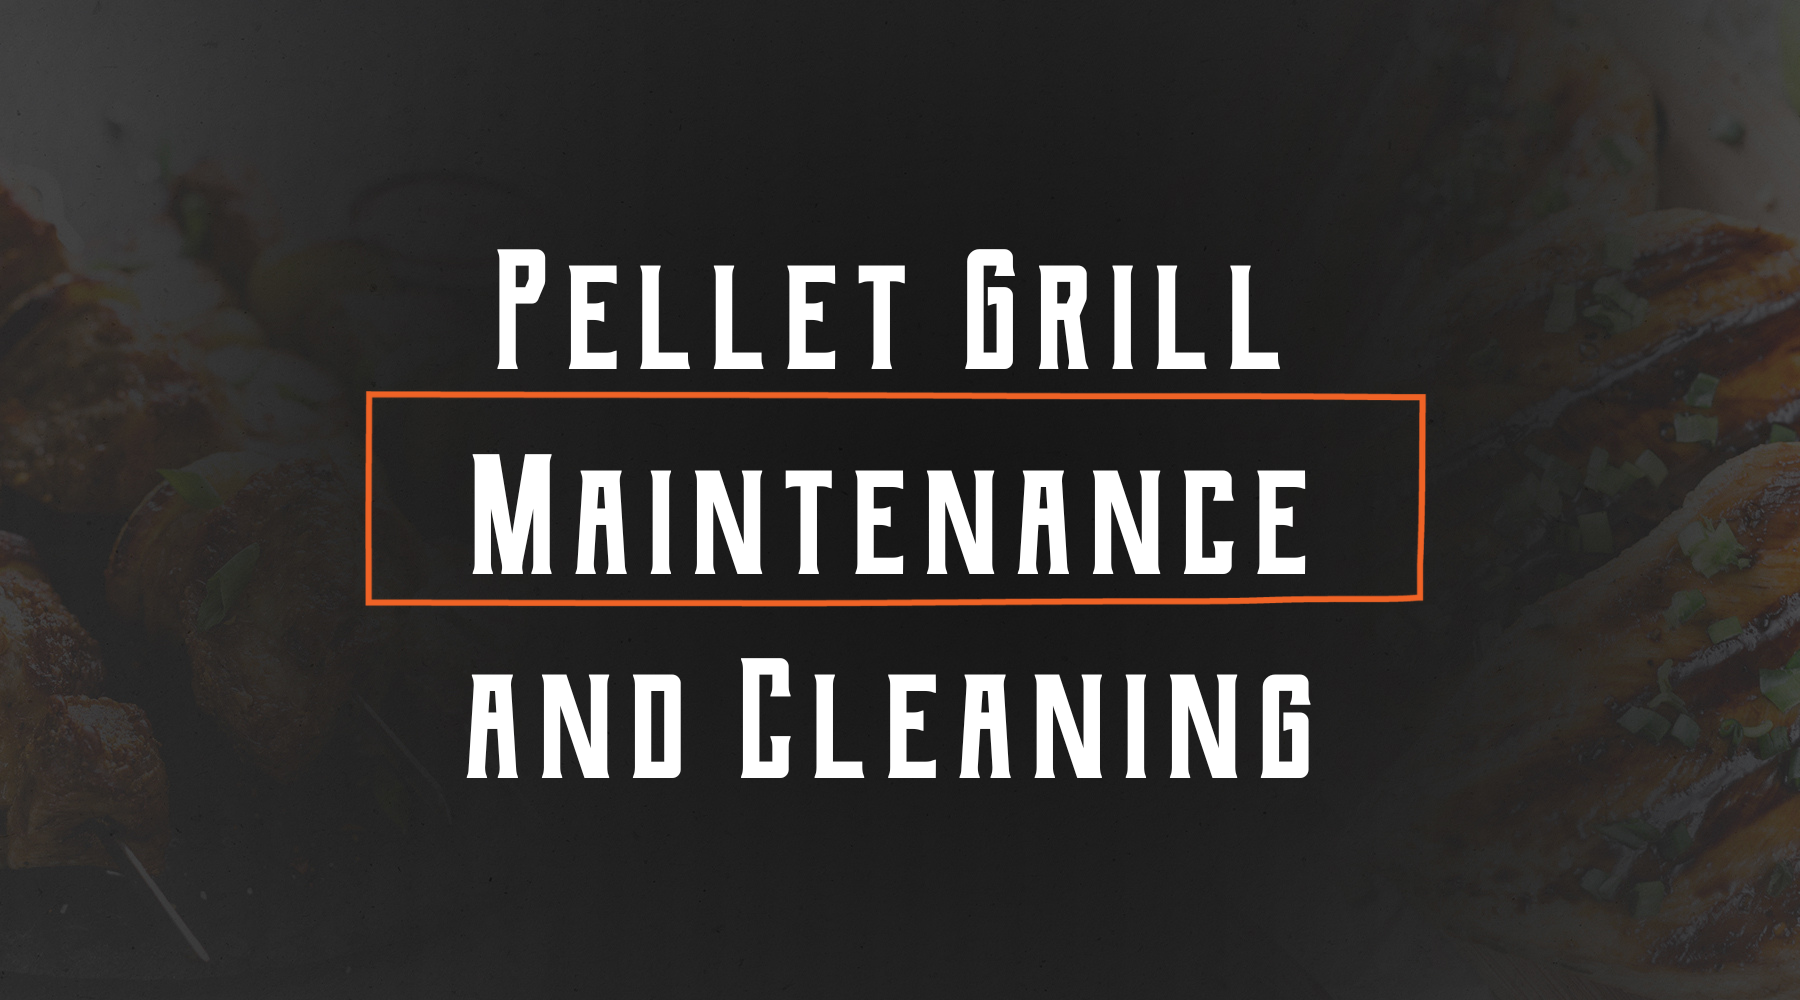 Pellet Grill Maintenance and Cleaning - The Top Things You Should Know